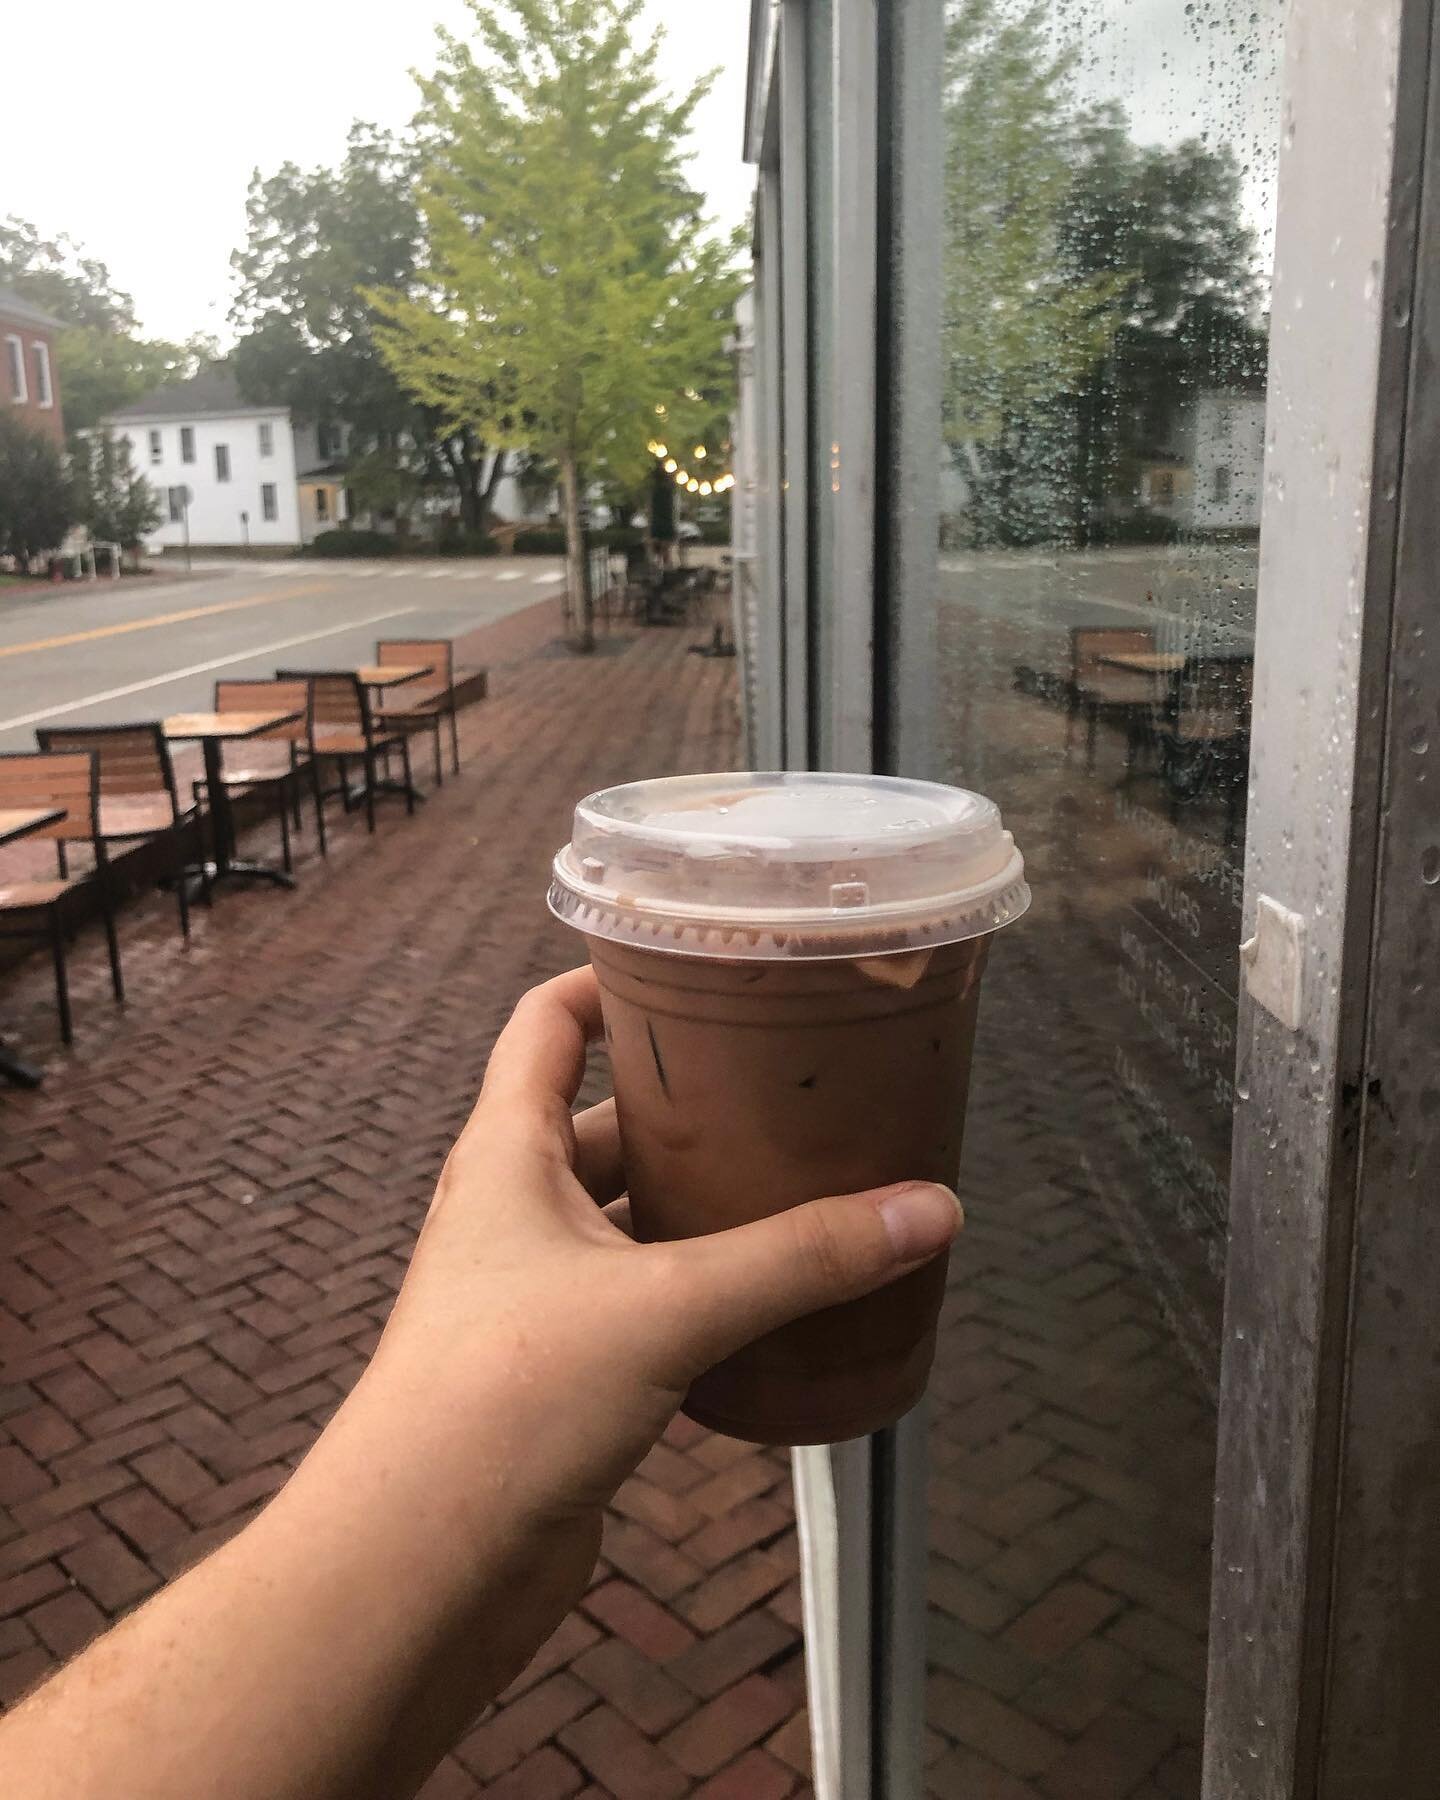 Mochas are our top seller when the rain hits and we can see why. Rich Valrhona chocolate powder and cardamom make it an unforgettable chocolate sauce that is sure to brighten up any grey day. Open till 3pm today!